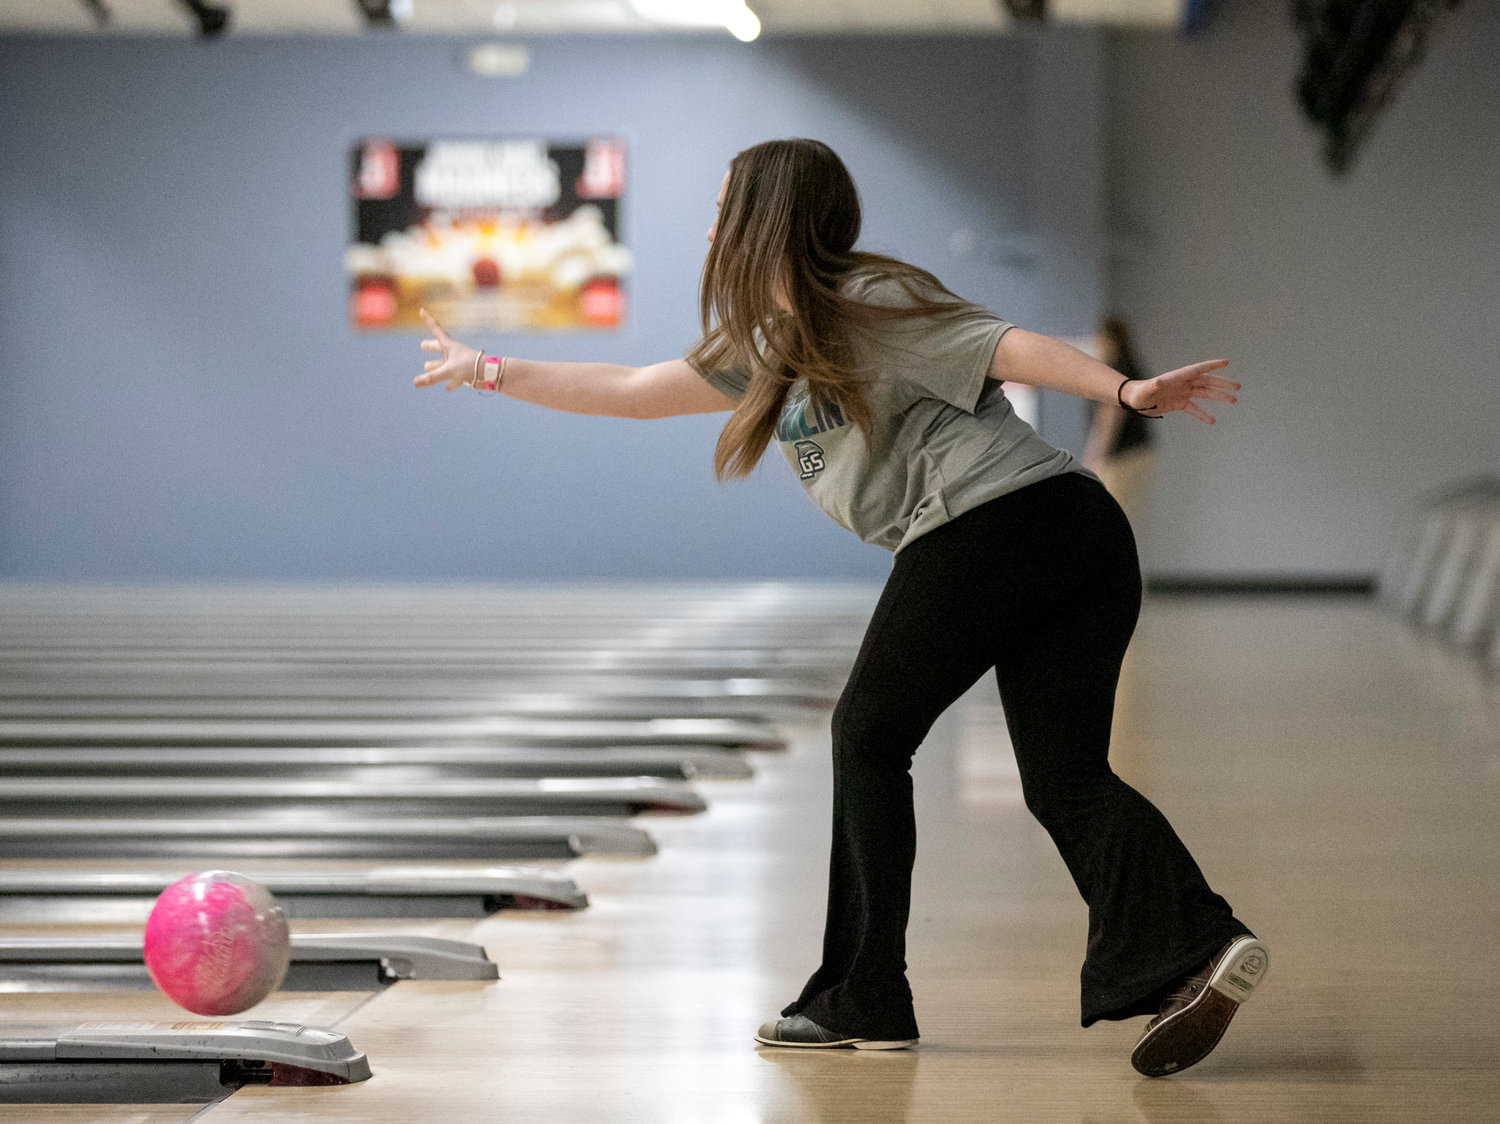 Gulf Shores’ Macy Morgan fires a shot during the South Regional bowling tournament at Spanish Fort’s Eastern Shore Lanes. The Dolphins were one of three local teams to secure a top-four finish at regionals to advance to the state tournament next week in Gadsden.